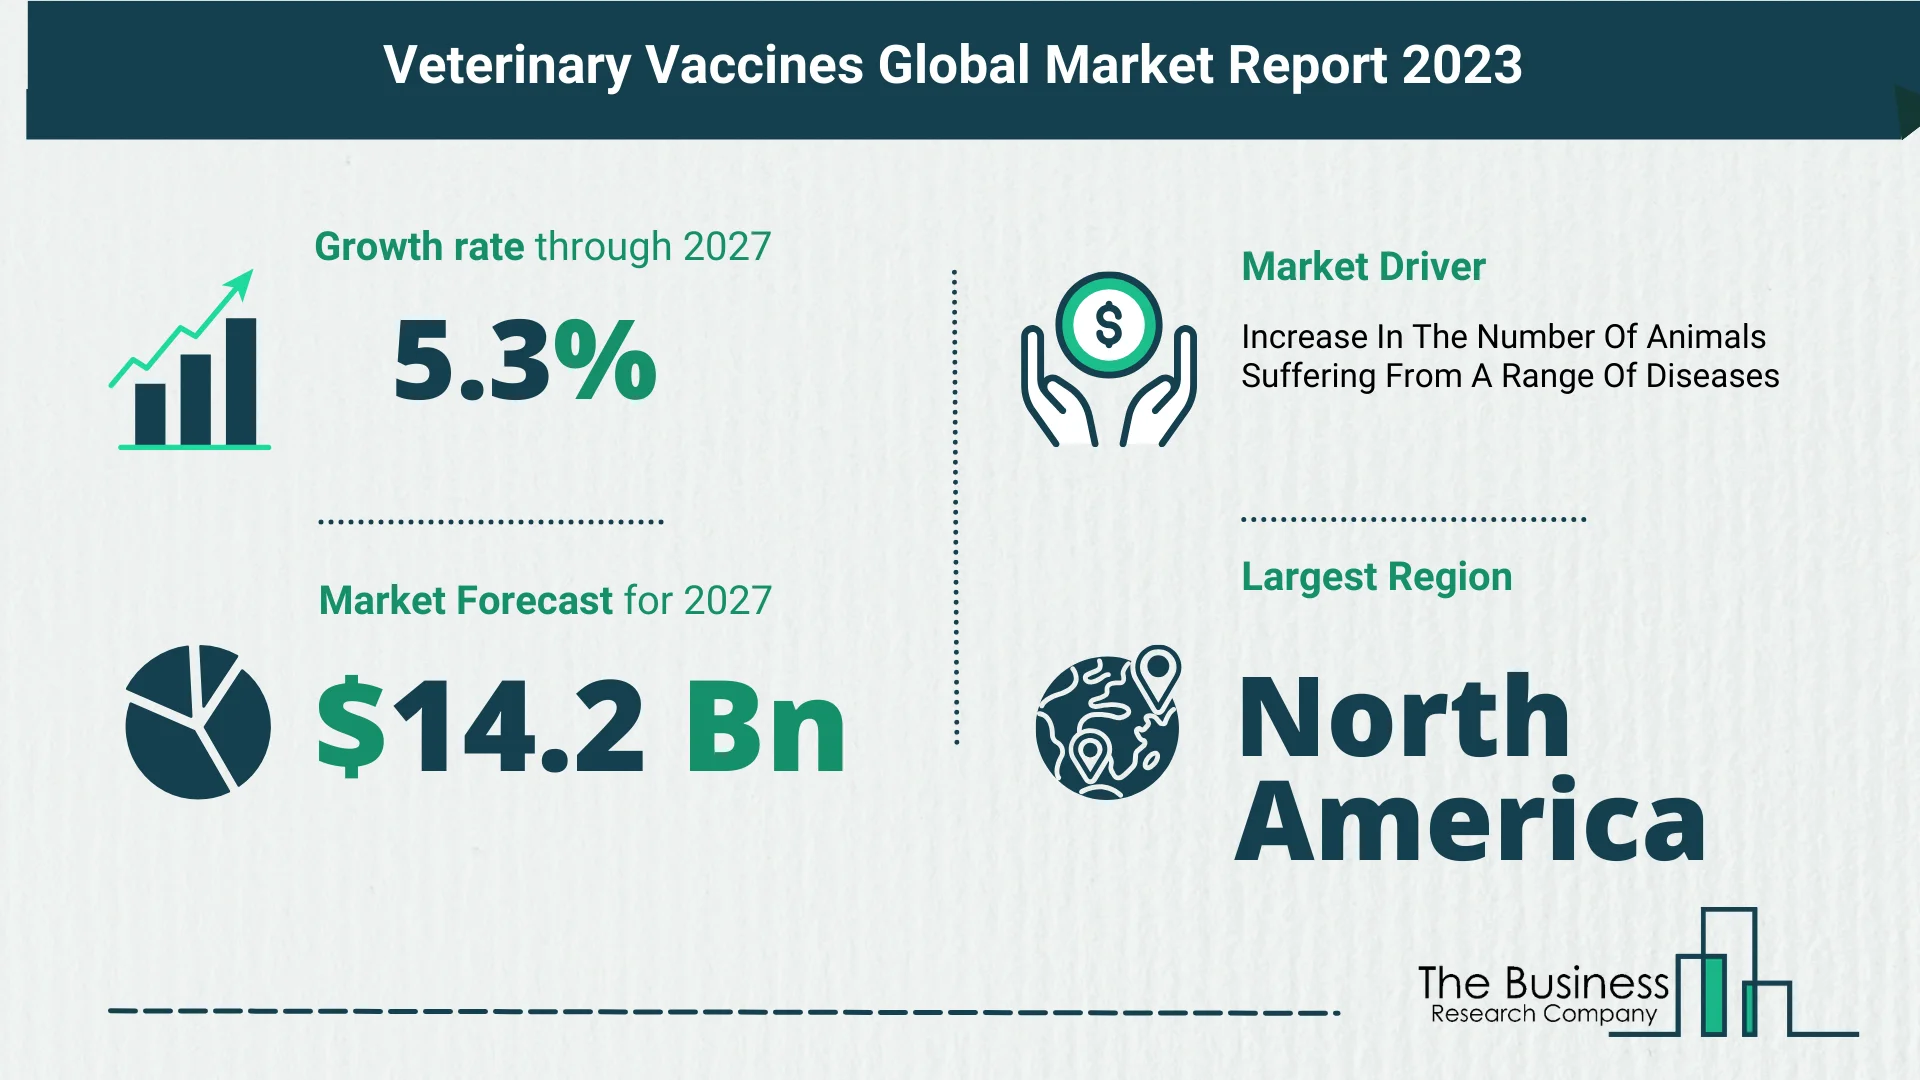 What Is The Forecast Growth Rate For The Veterinary Vaccines Market?